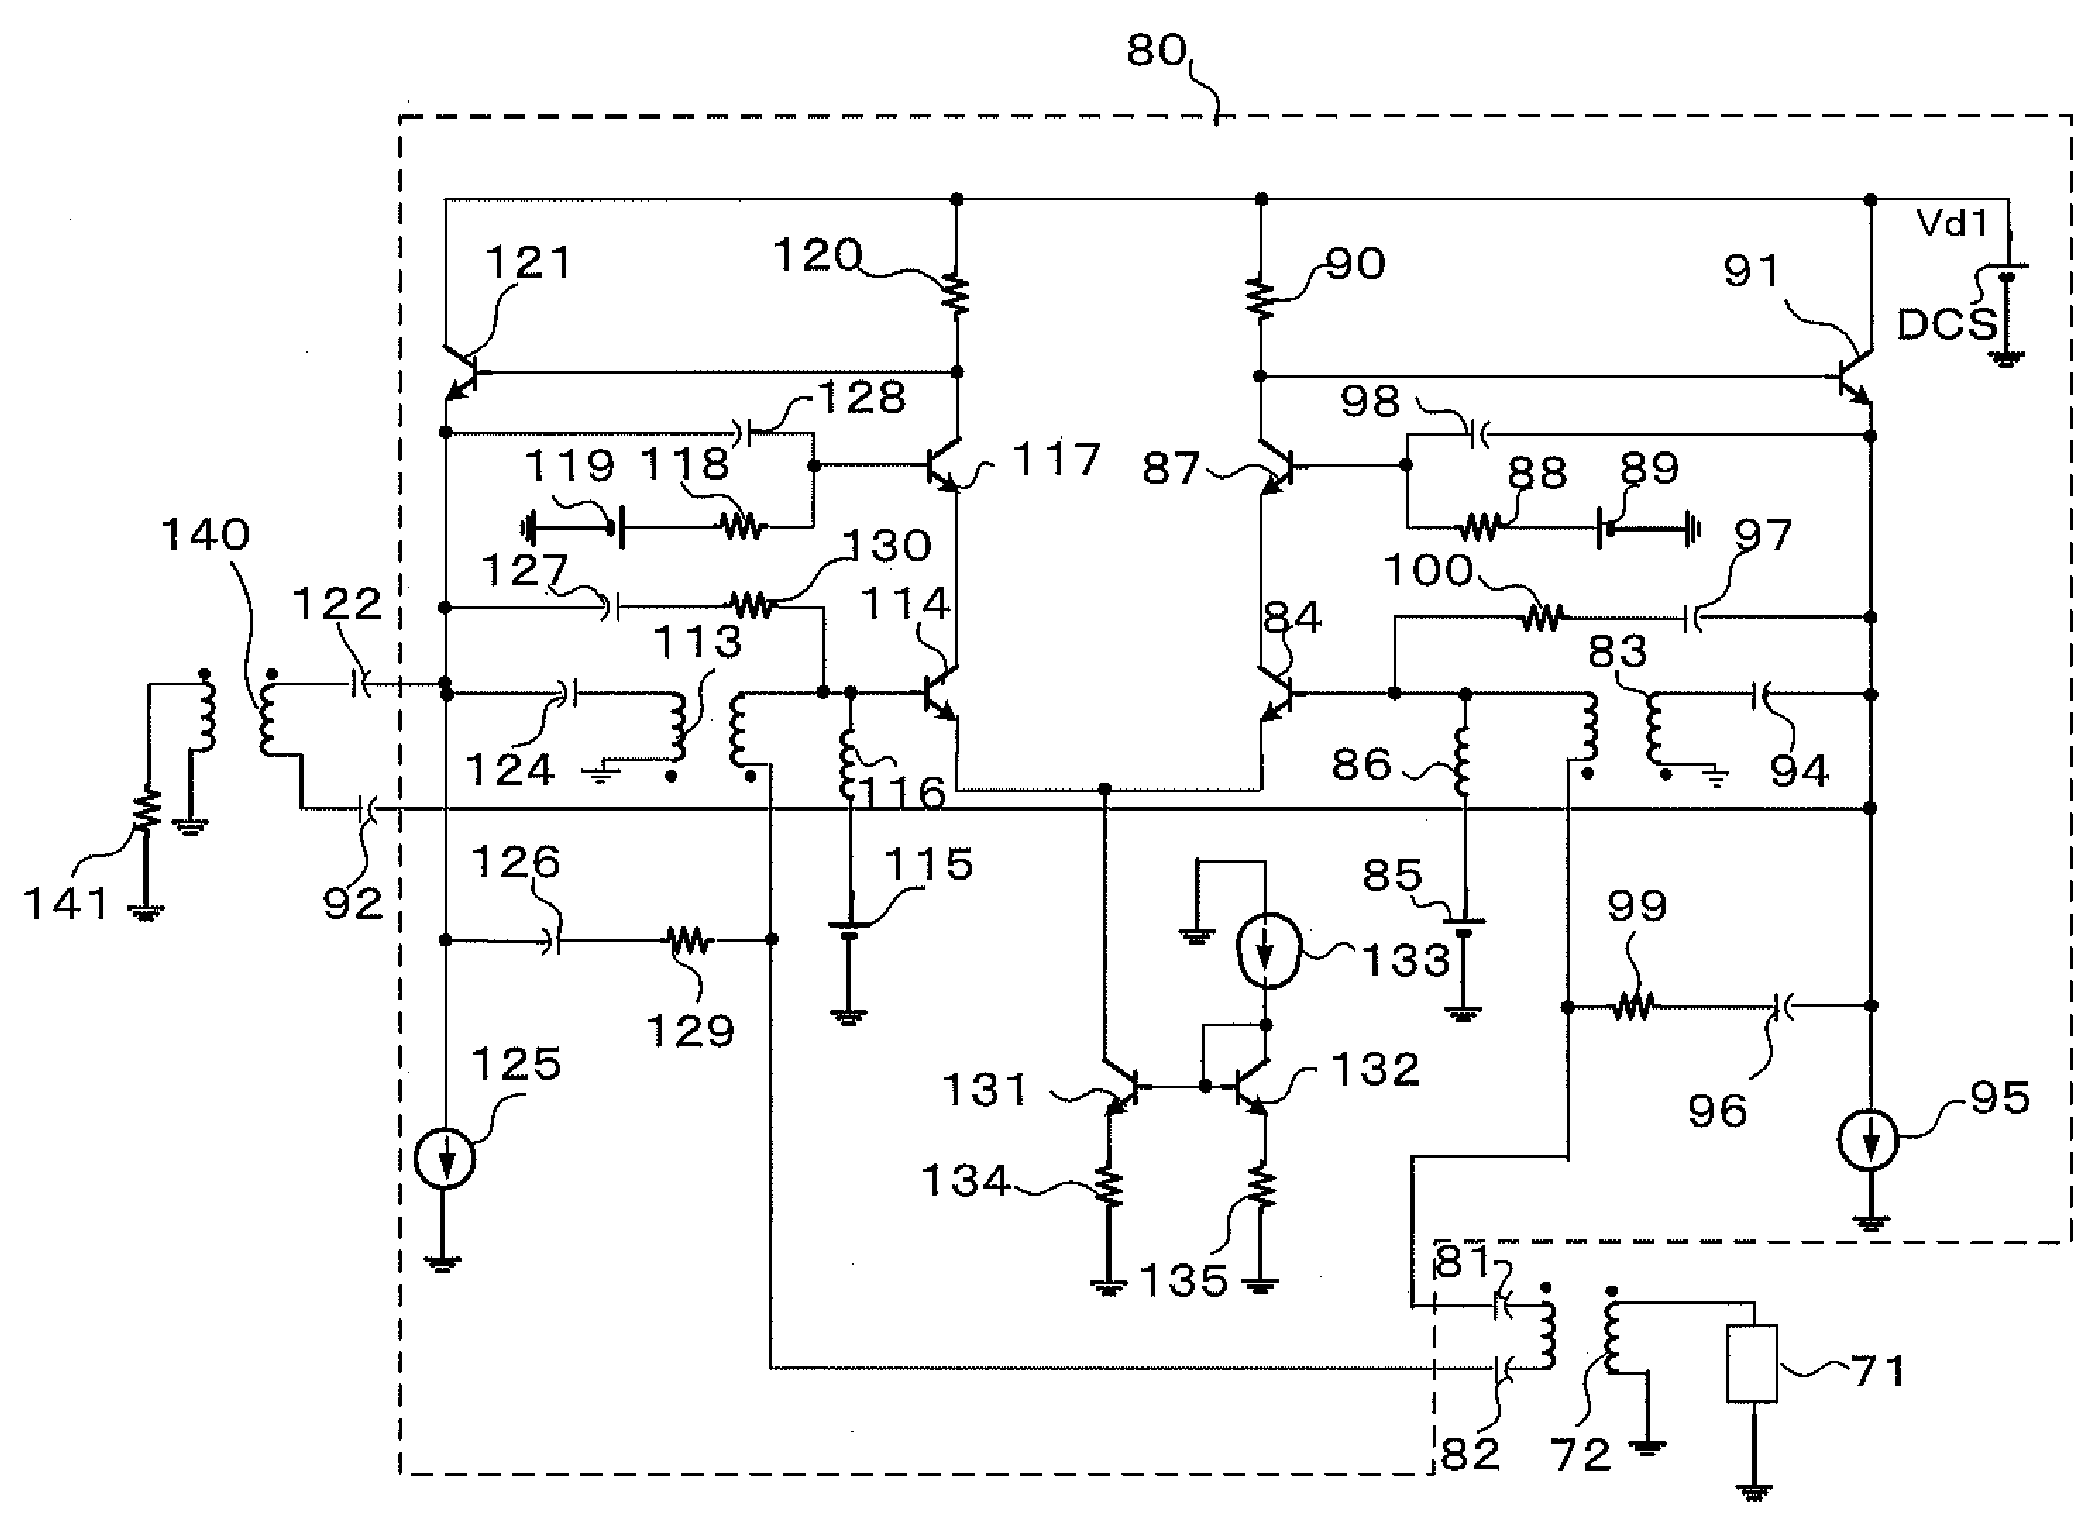 Low noise amplifier and differential amplifier